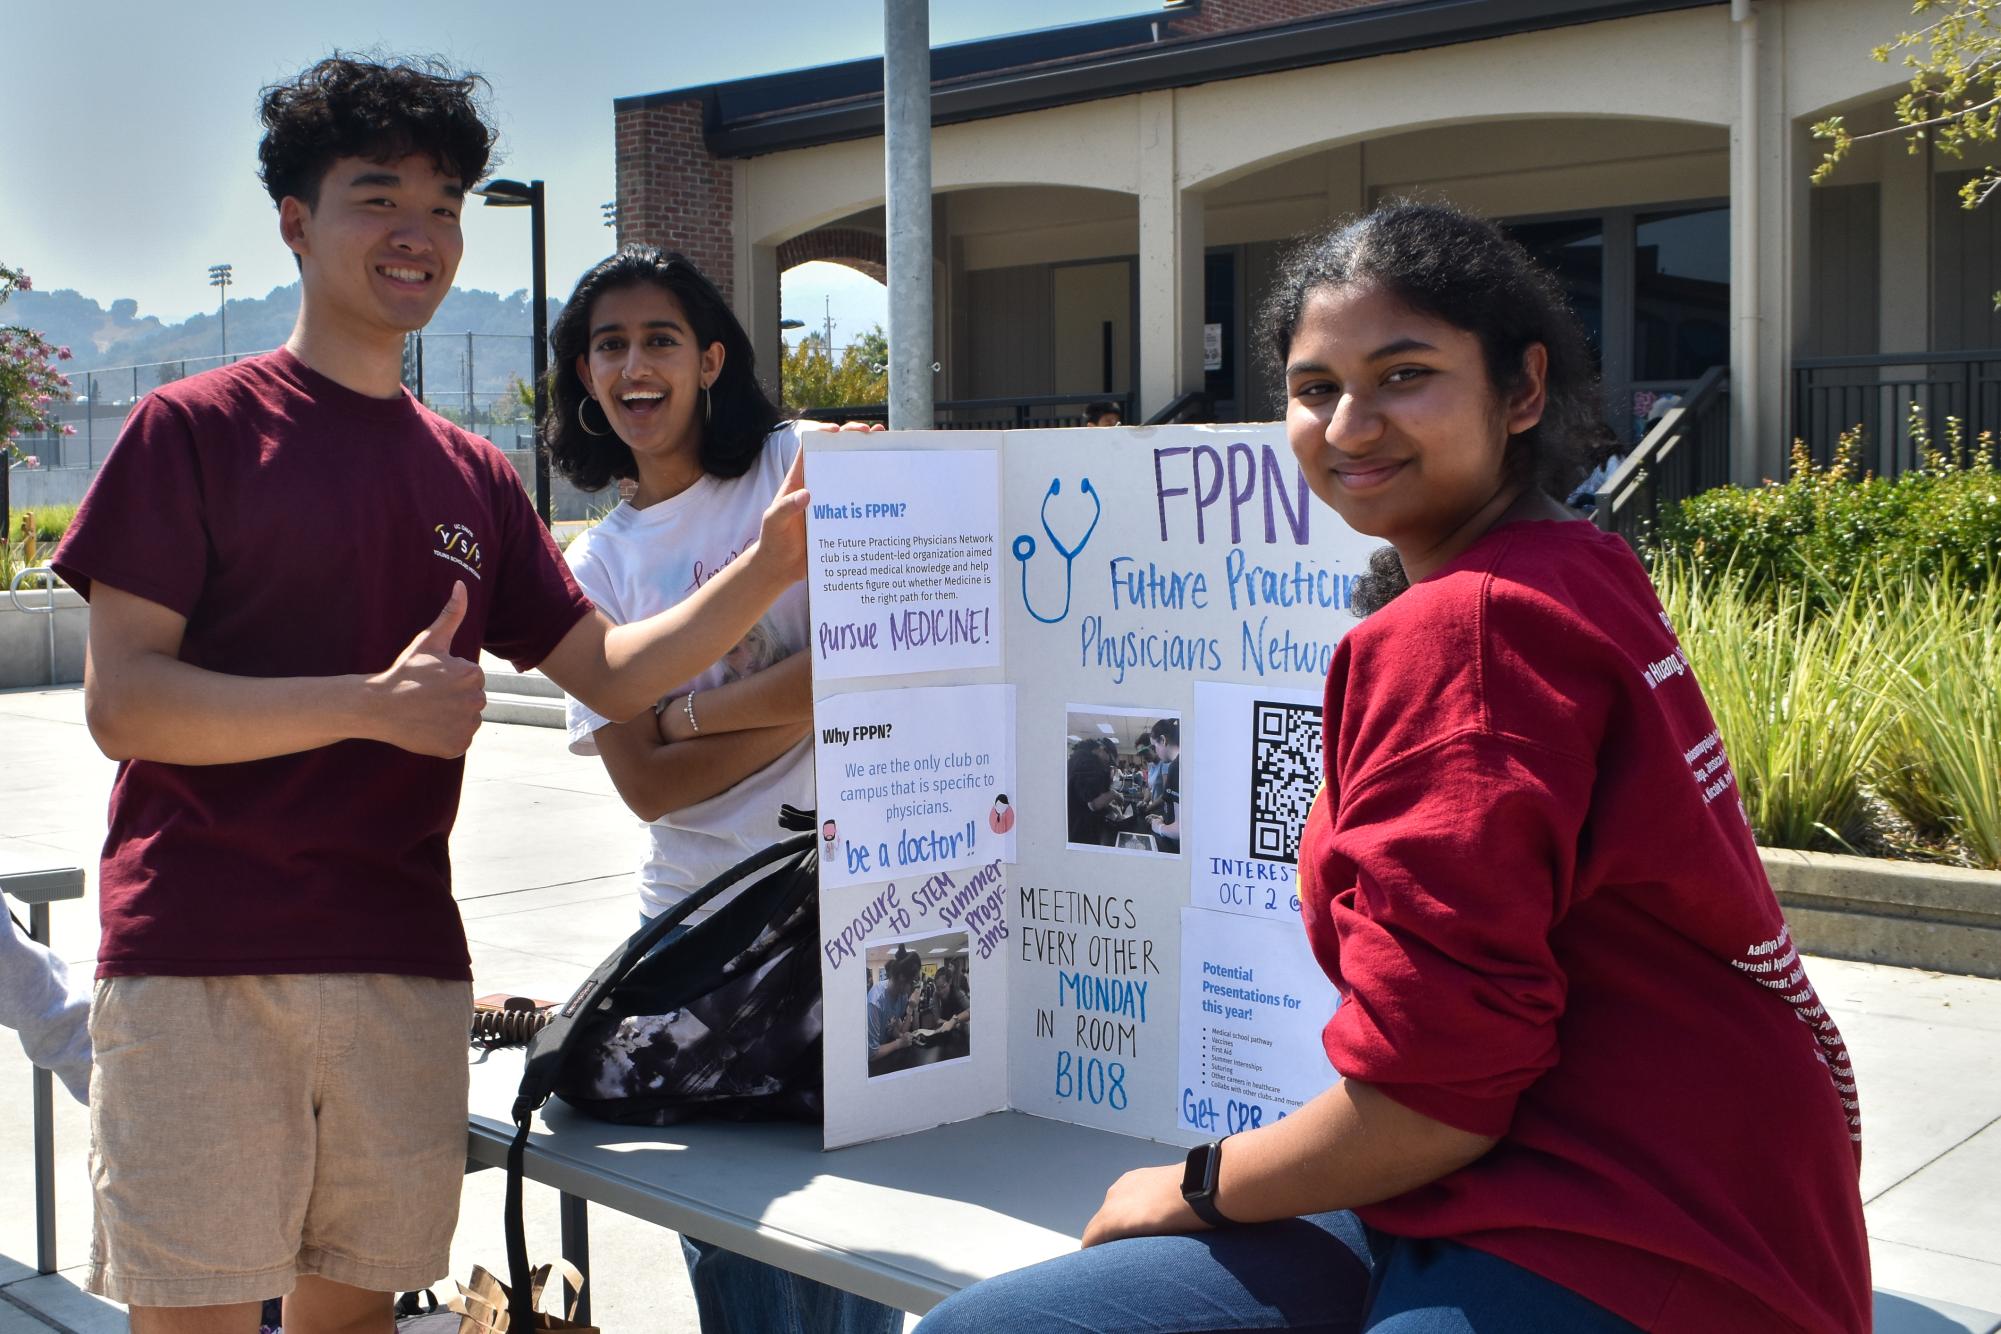 Members of the Future Practicing Physicians Network club show off their info board.